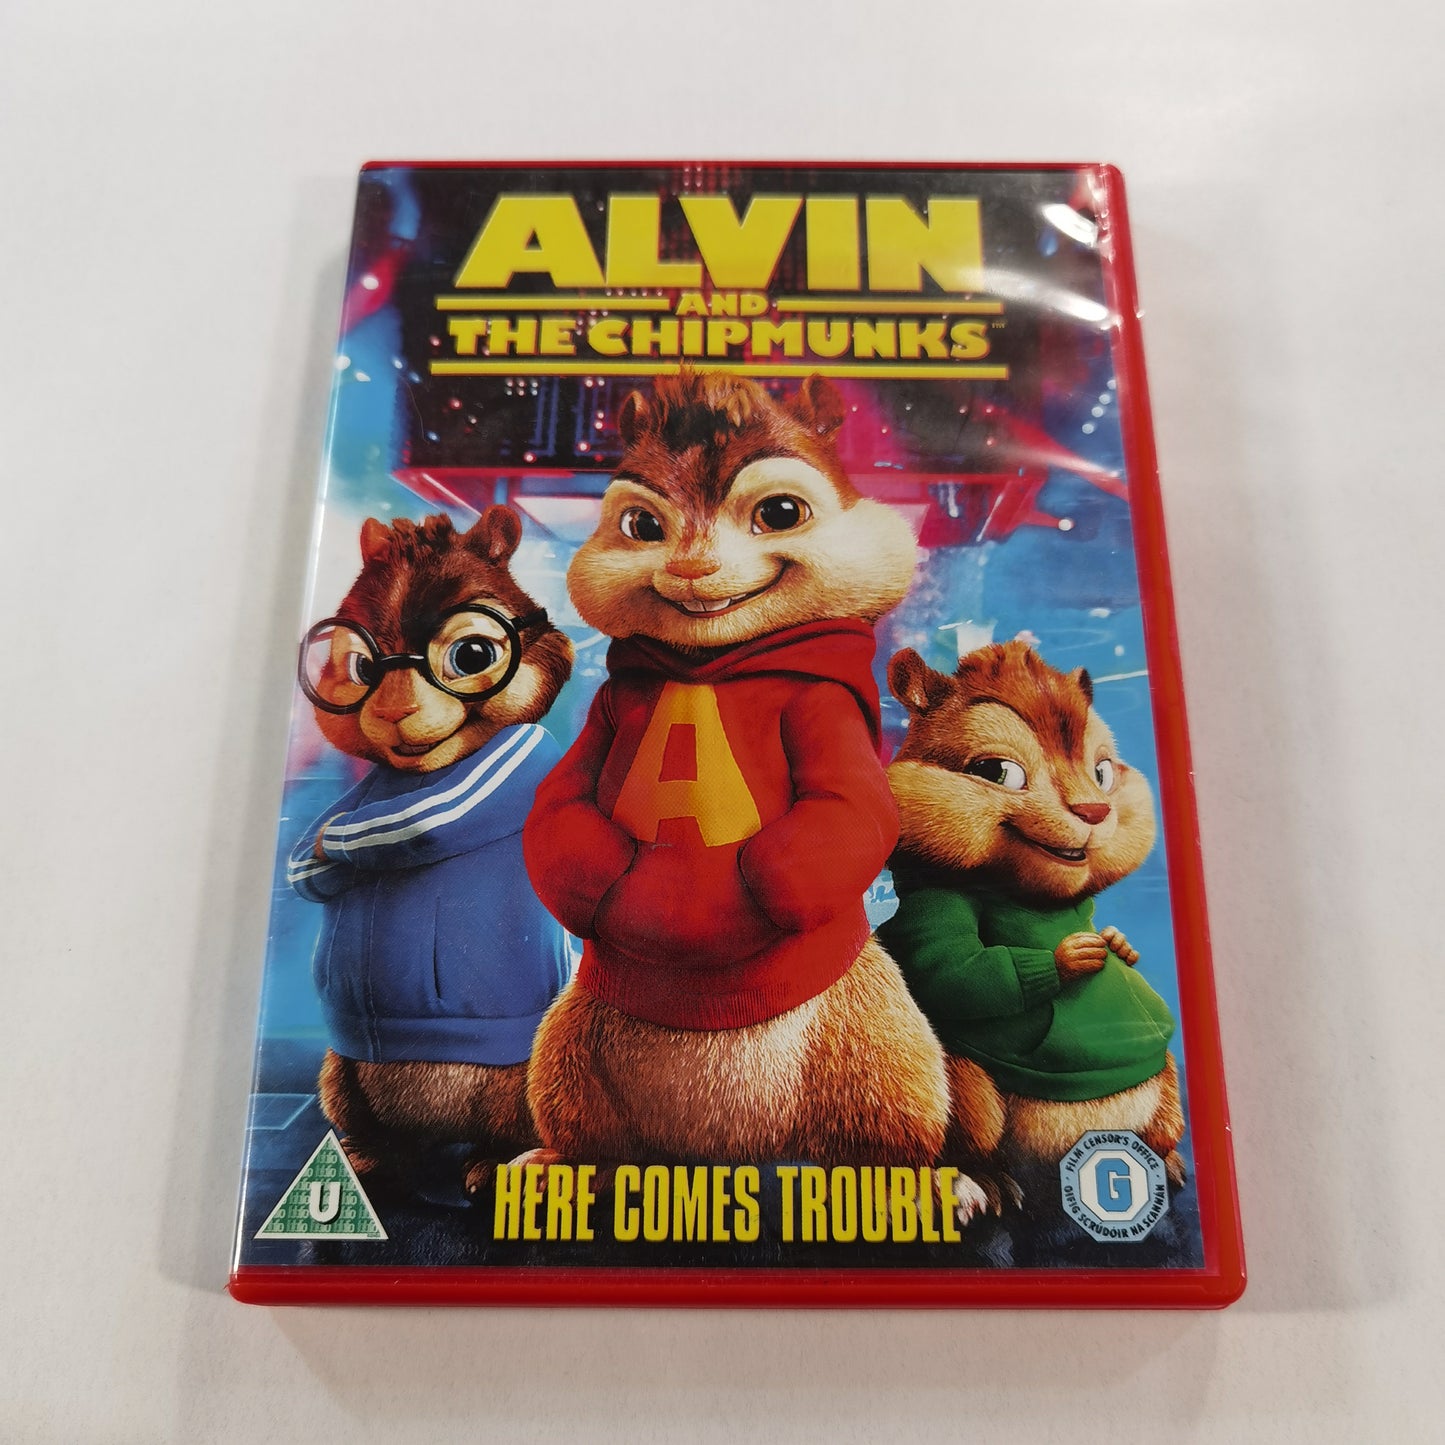 Alvin And The Chipmunks (2007) - DVD 5039036037075